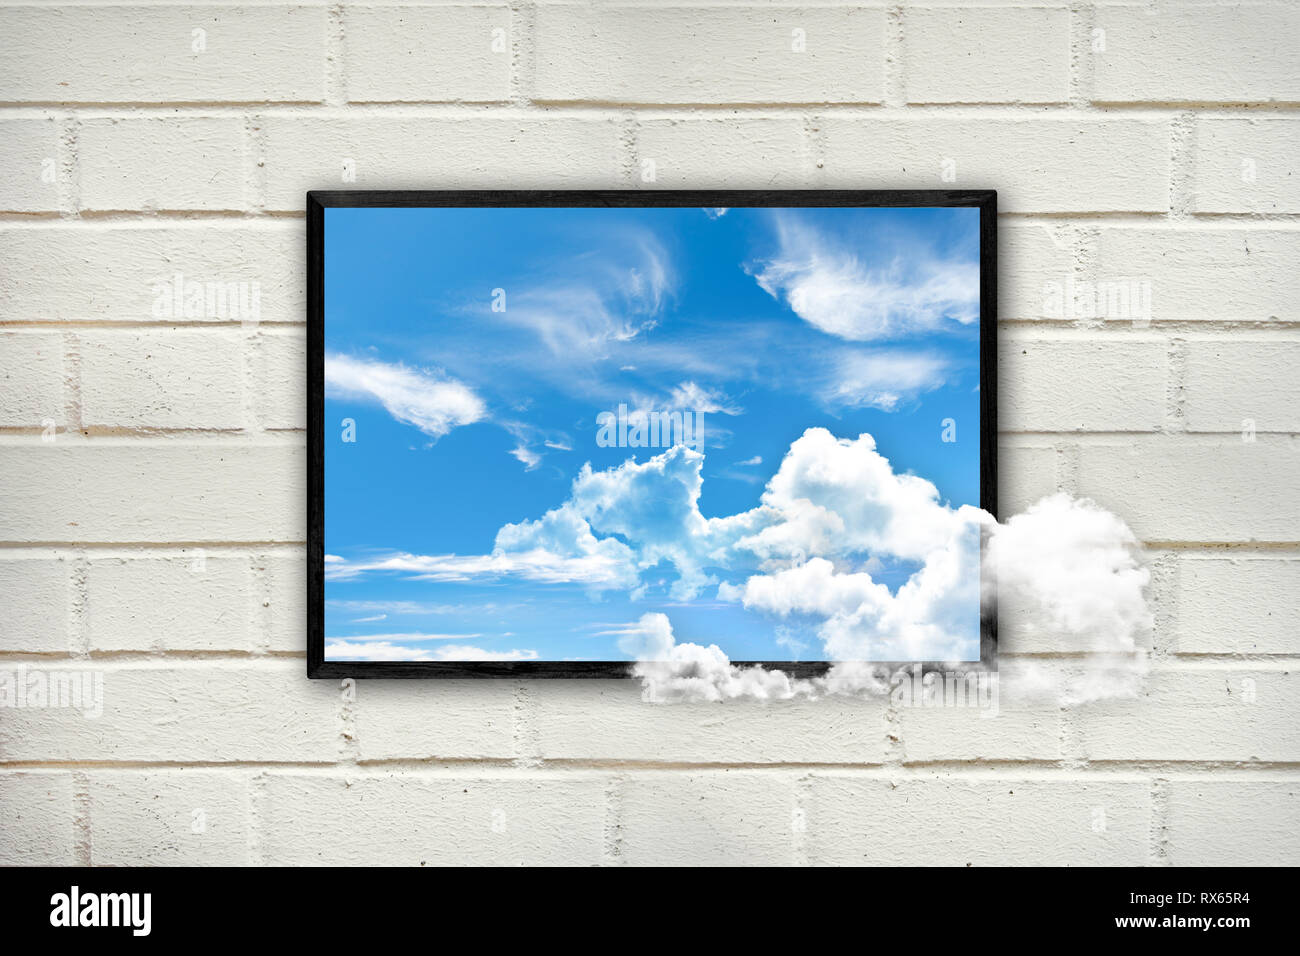 Frame with clouds and blue sky on a white brick wall, thinking outside the box concept Stock Photo